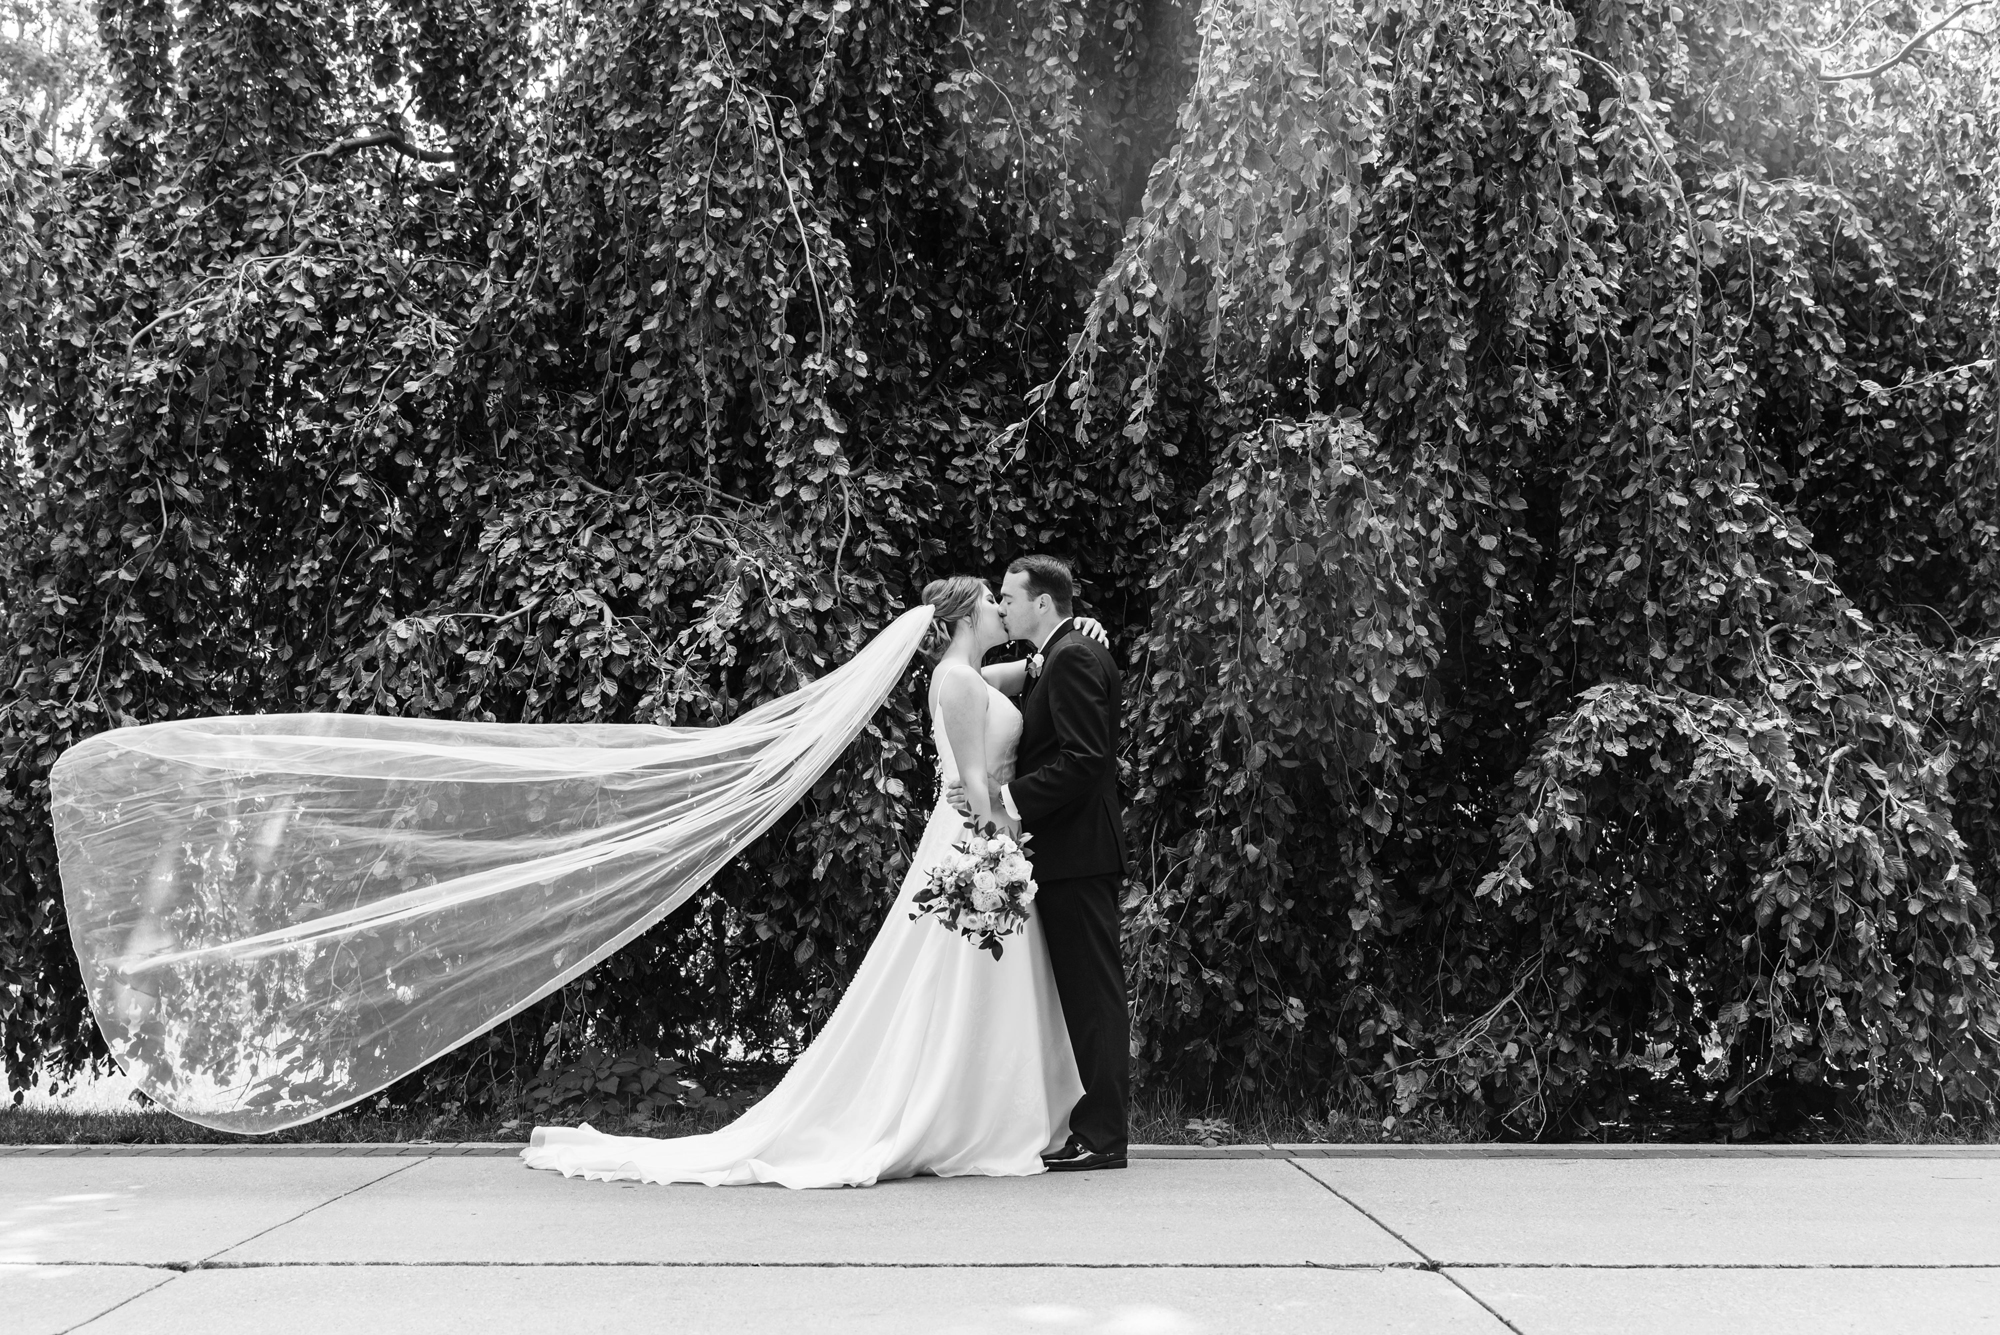 Bride & Groom in front of an exotic California inspired tree after their wedding ceremony at the Basilica of the Sacred Heart on the campus of the University of Notre Dame